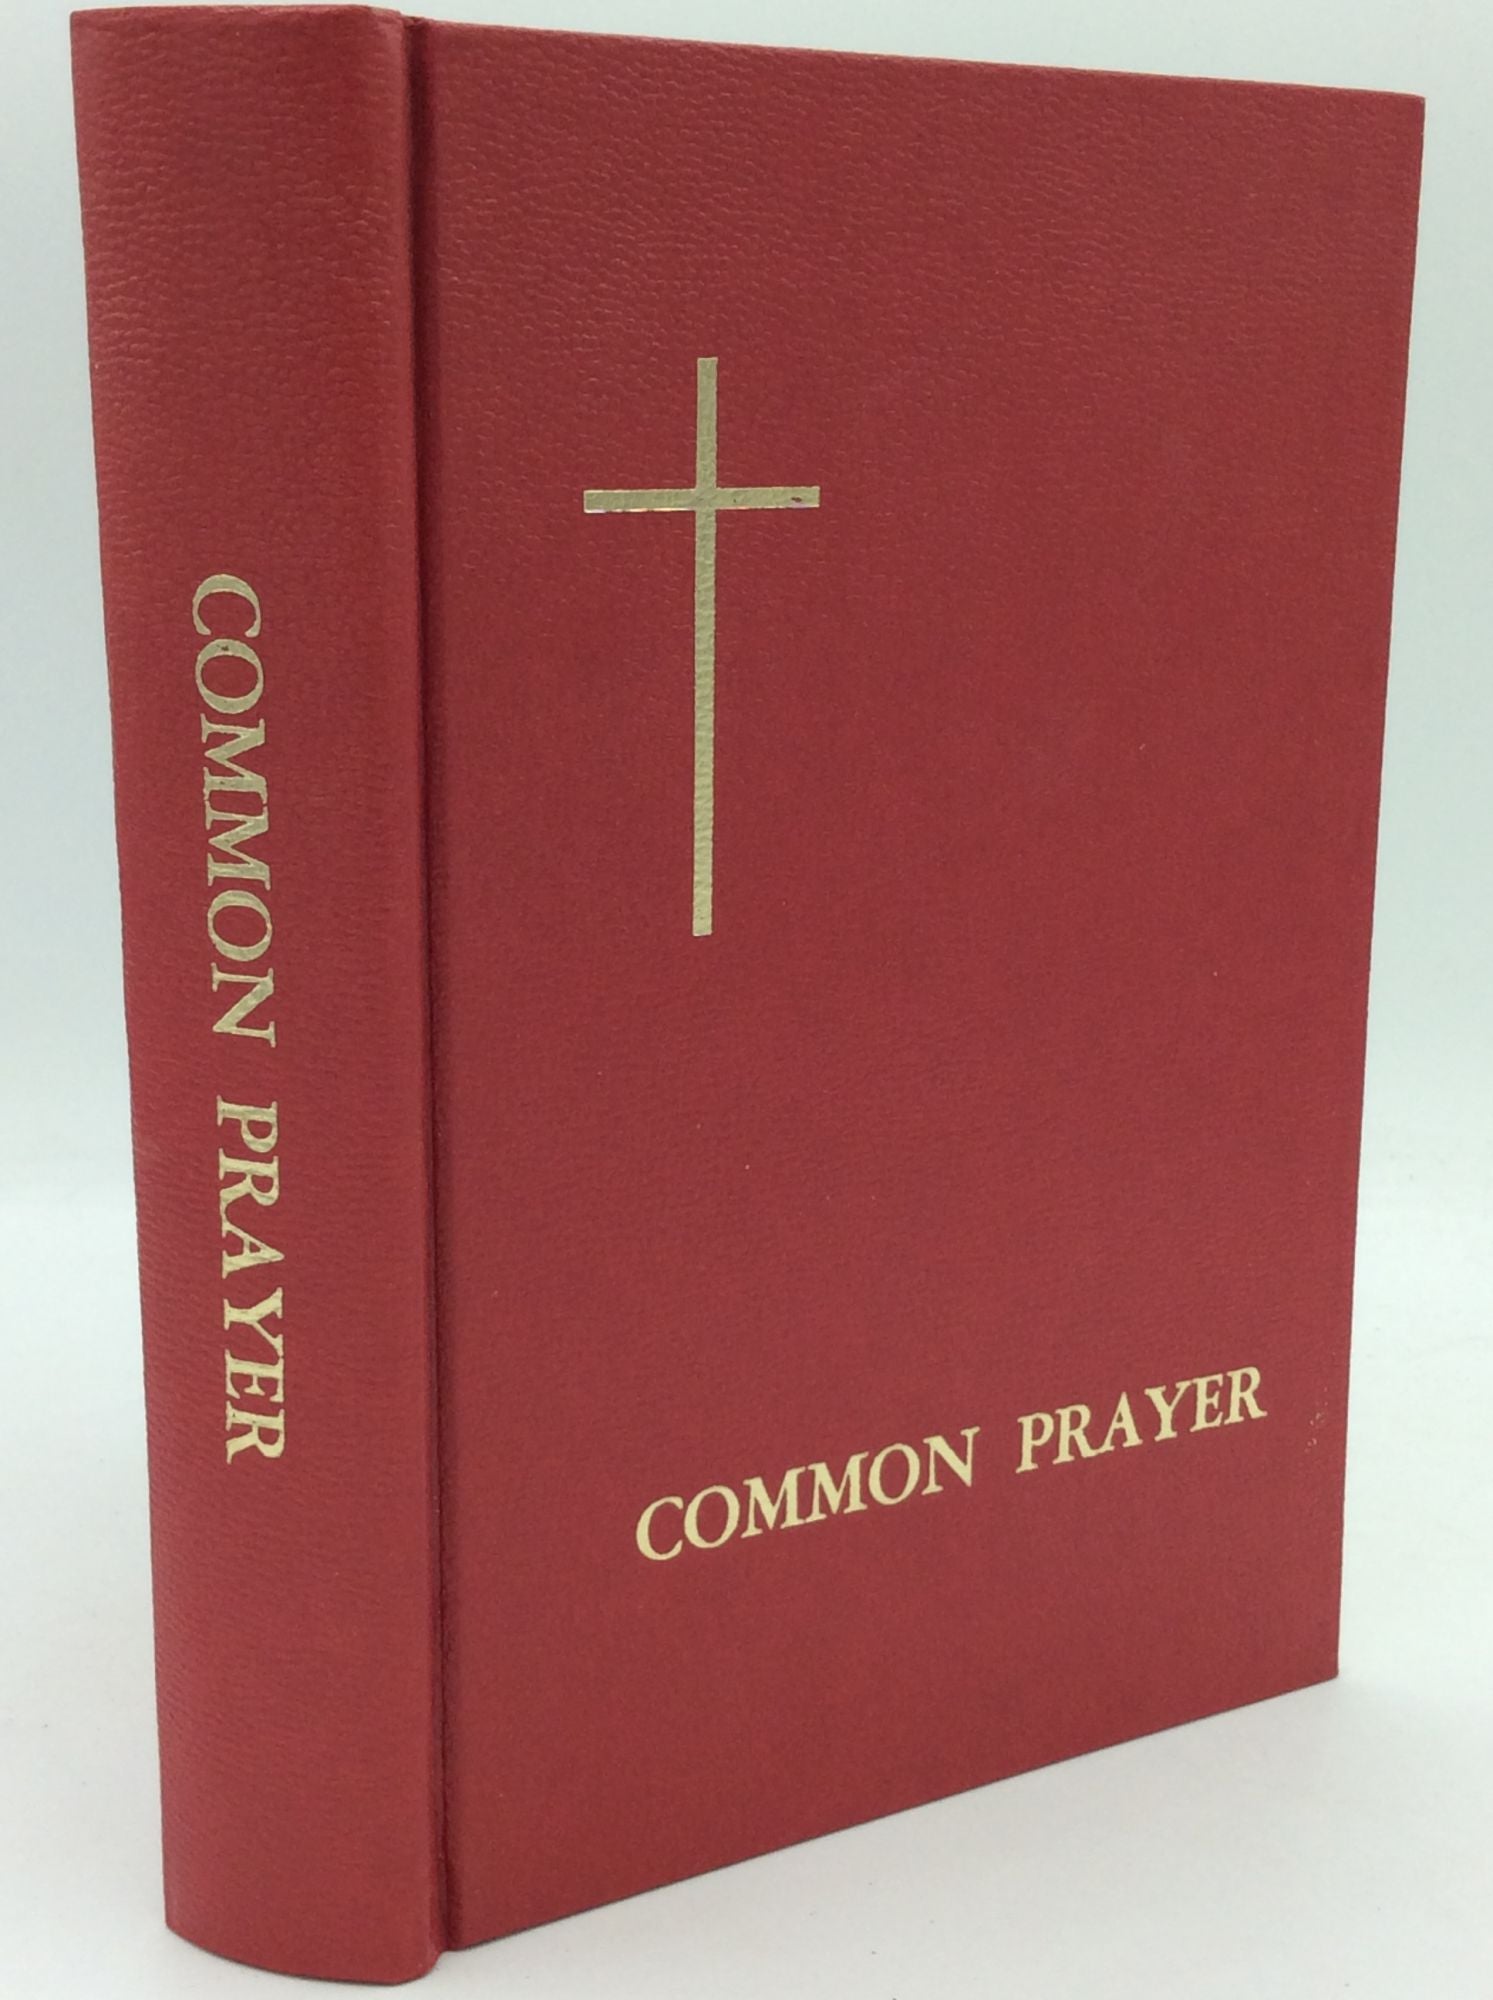 THE BOOK OF COMMON PRAYER and Administration of the Sacraments and Other  Rites and Ceremonies of the Catholic Church According to the Use of the